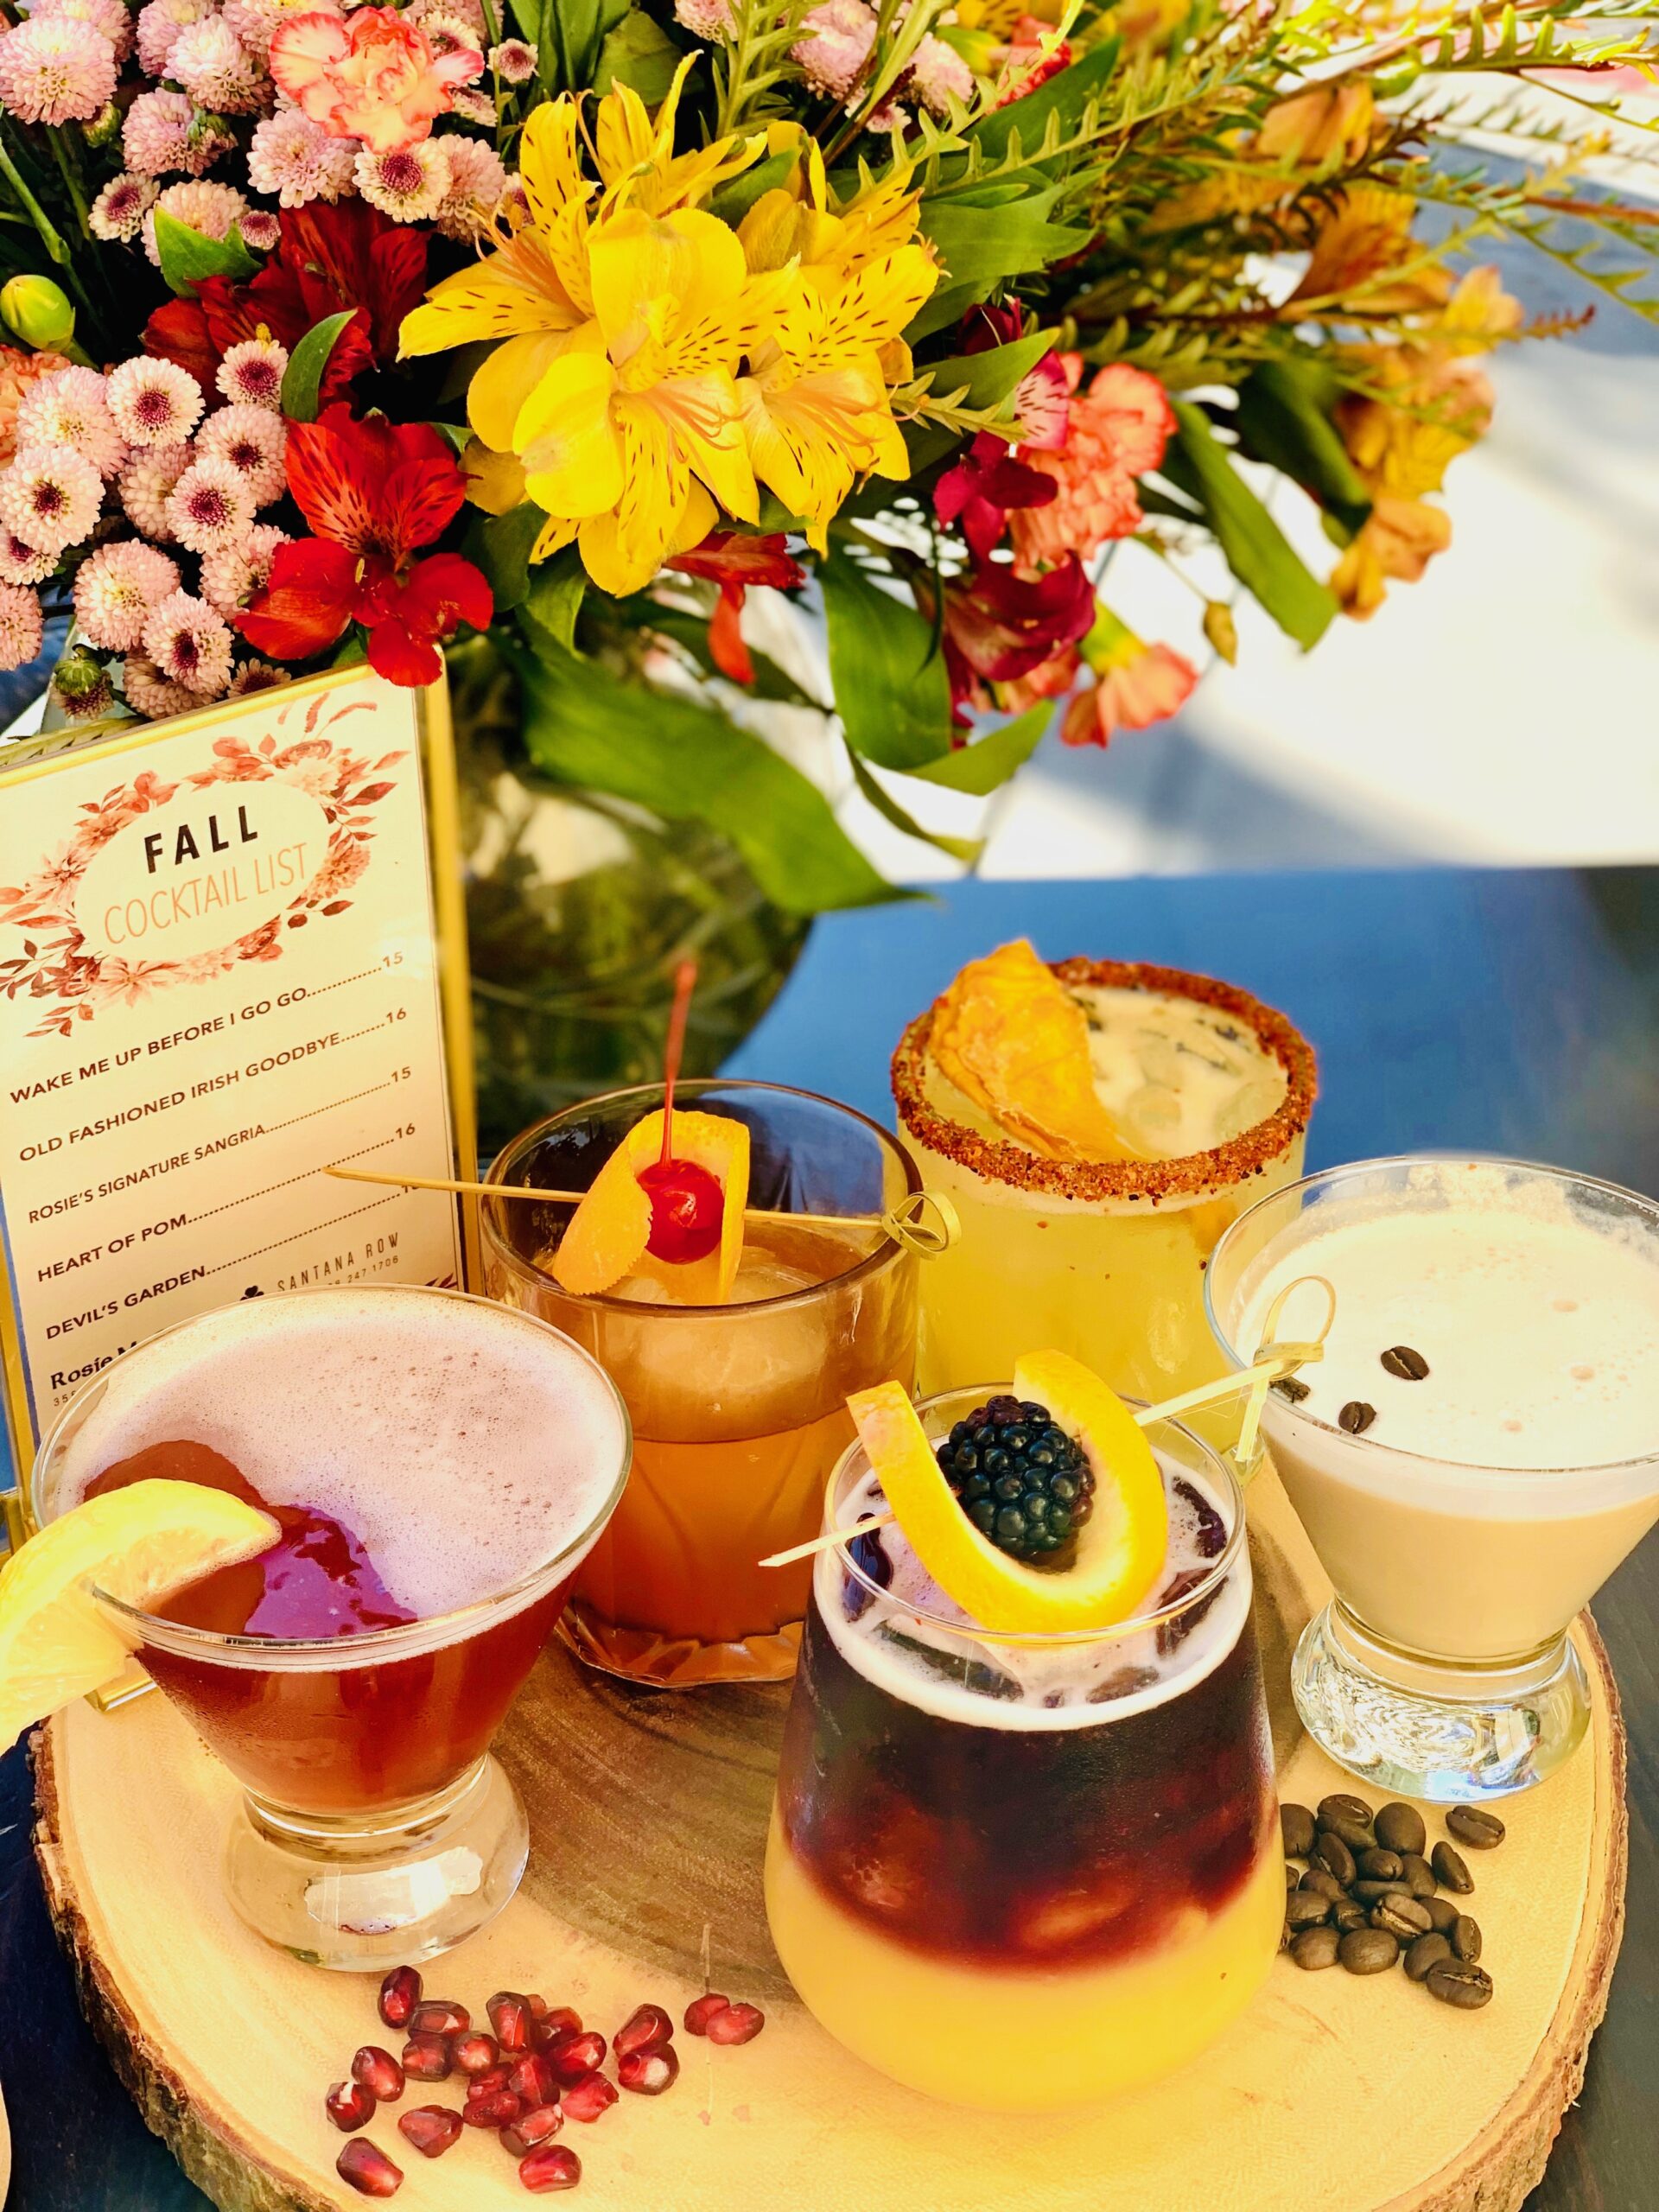 Fall-Cocktails-SR-2-scaled.jpg